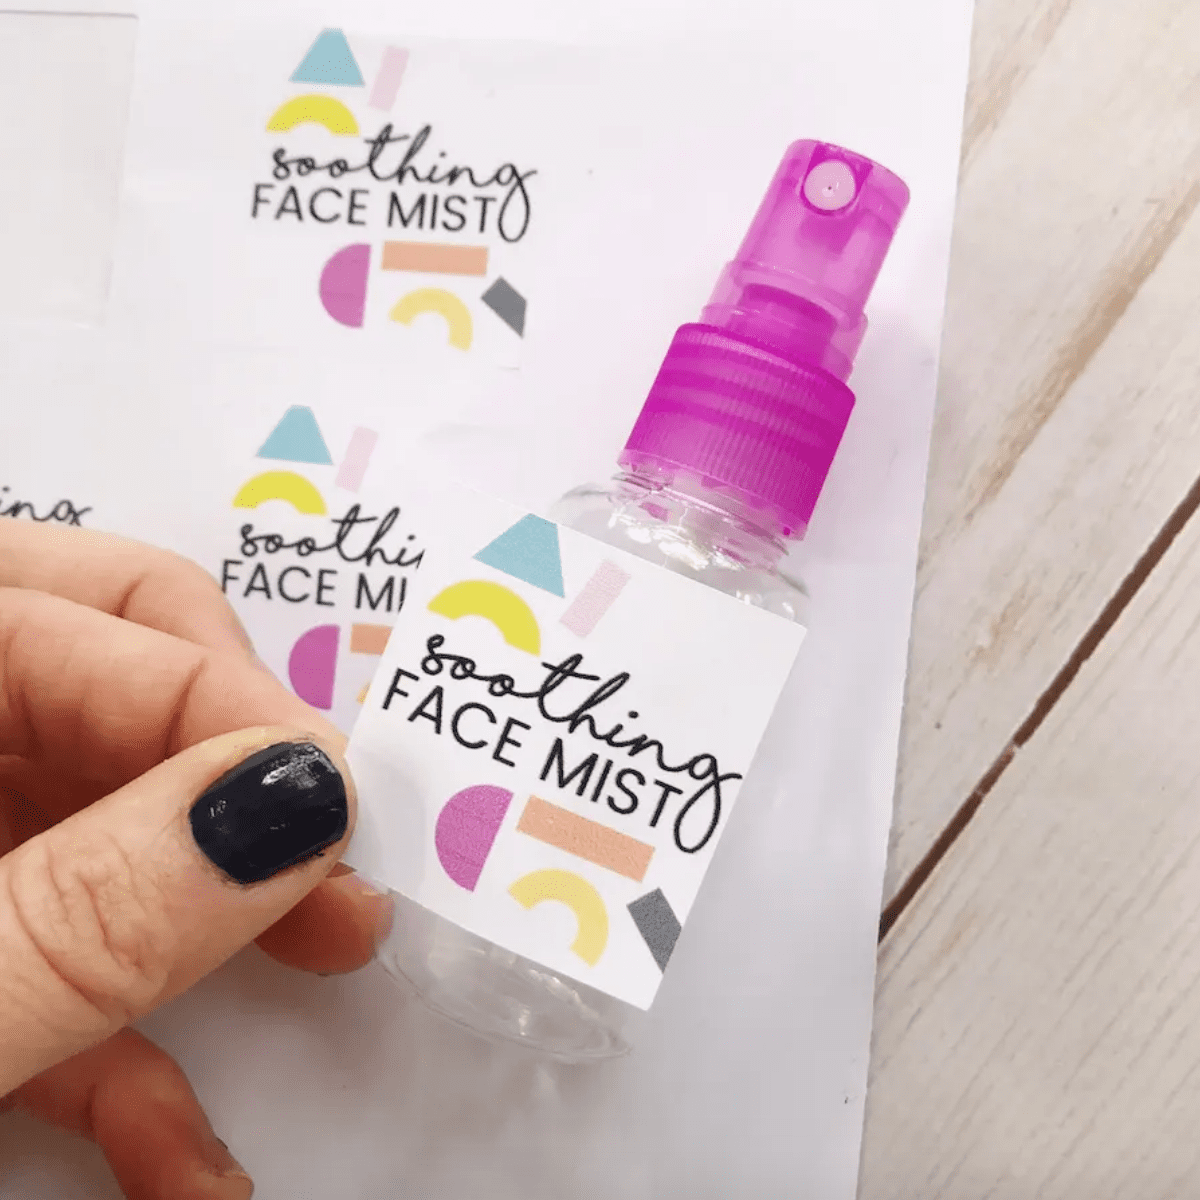 Unique Mother's Day Gift Ideas: DIY Face Mist Bottles + a tutorial featured by Top US Craft Blog + The Pretty Life Girls